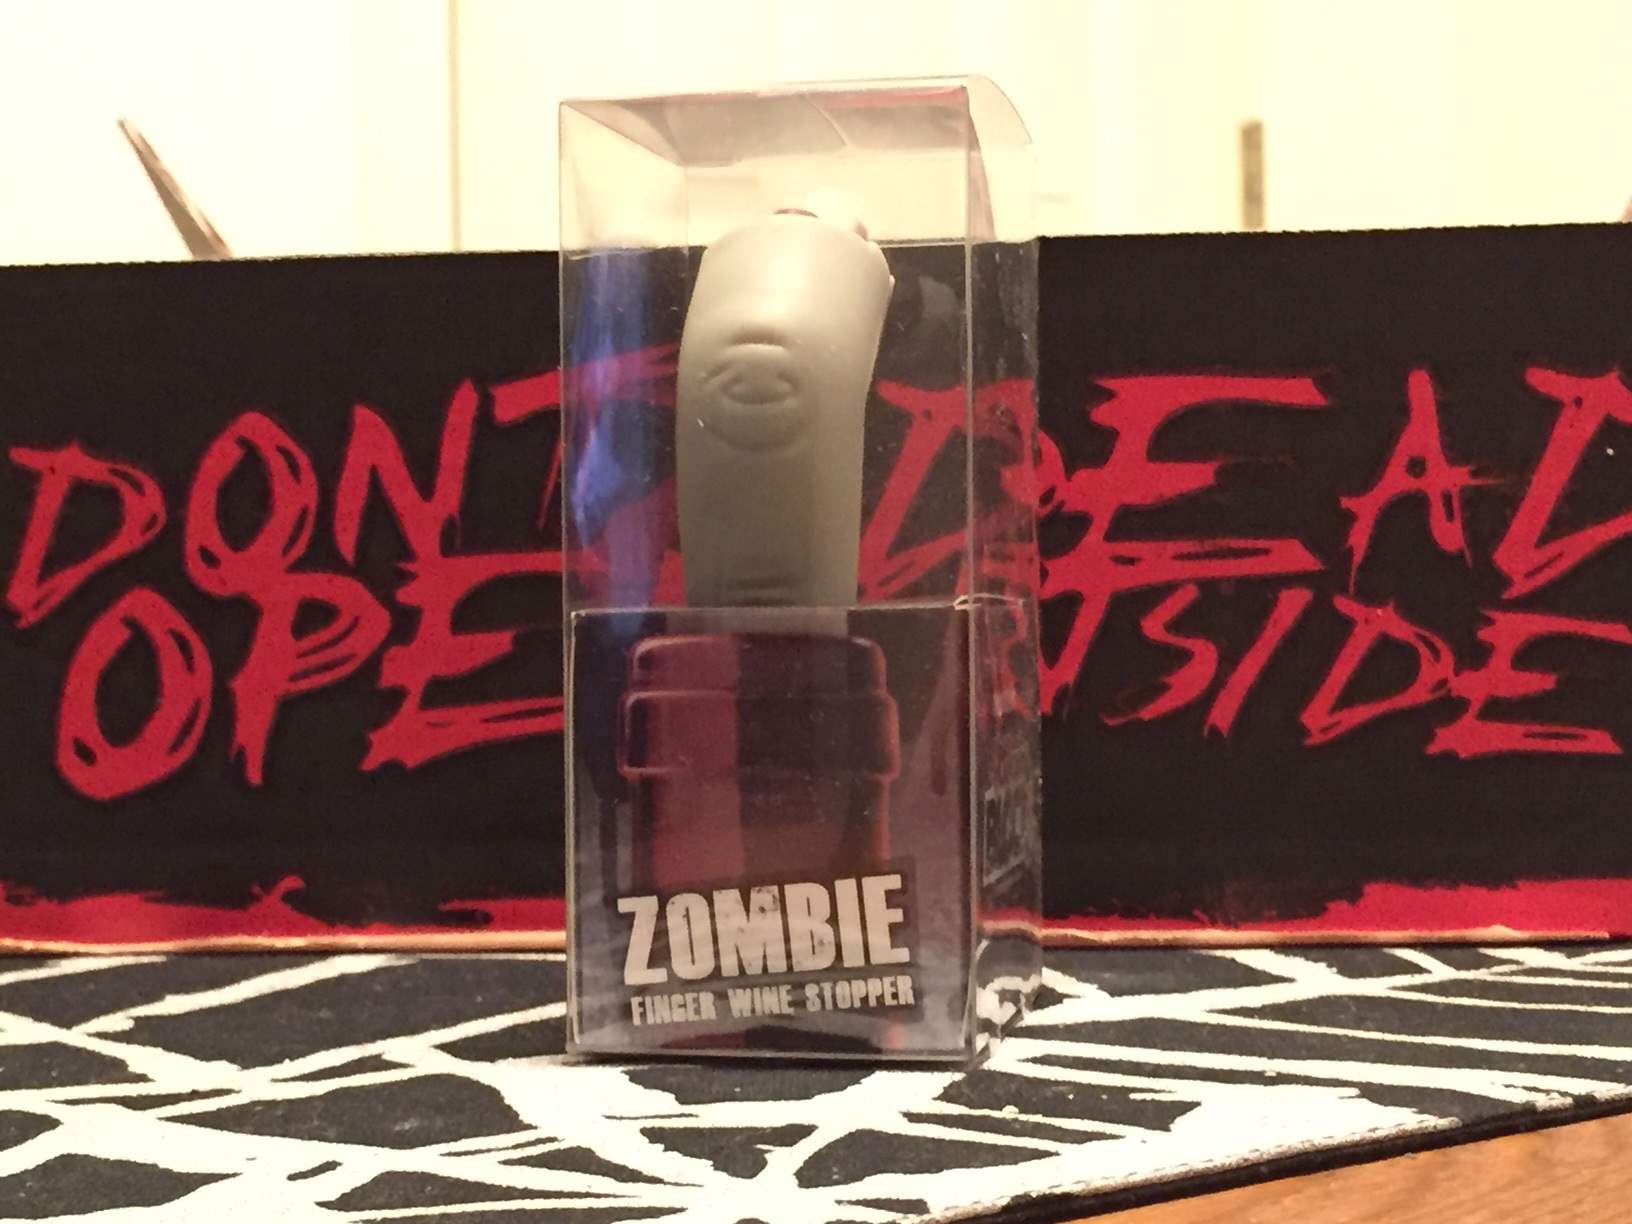 A wine stopper in the shape of a zombie finger in February 2016's Horror Block